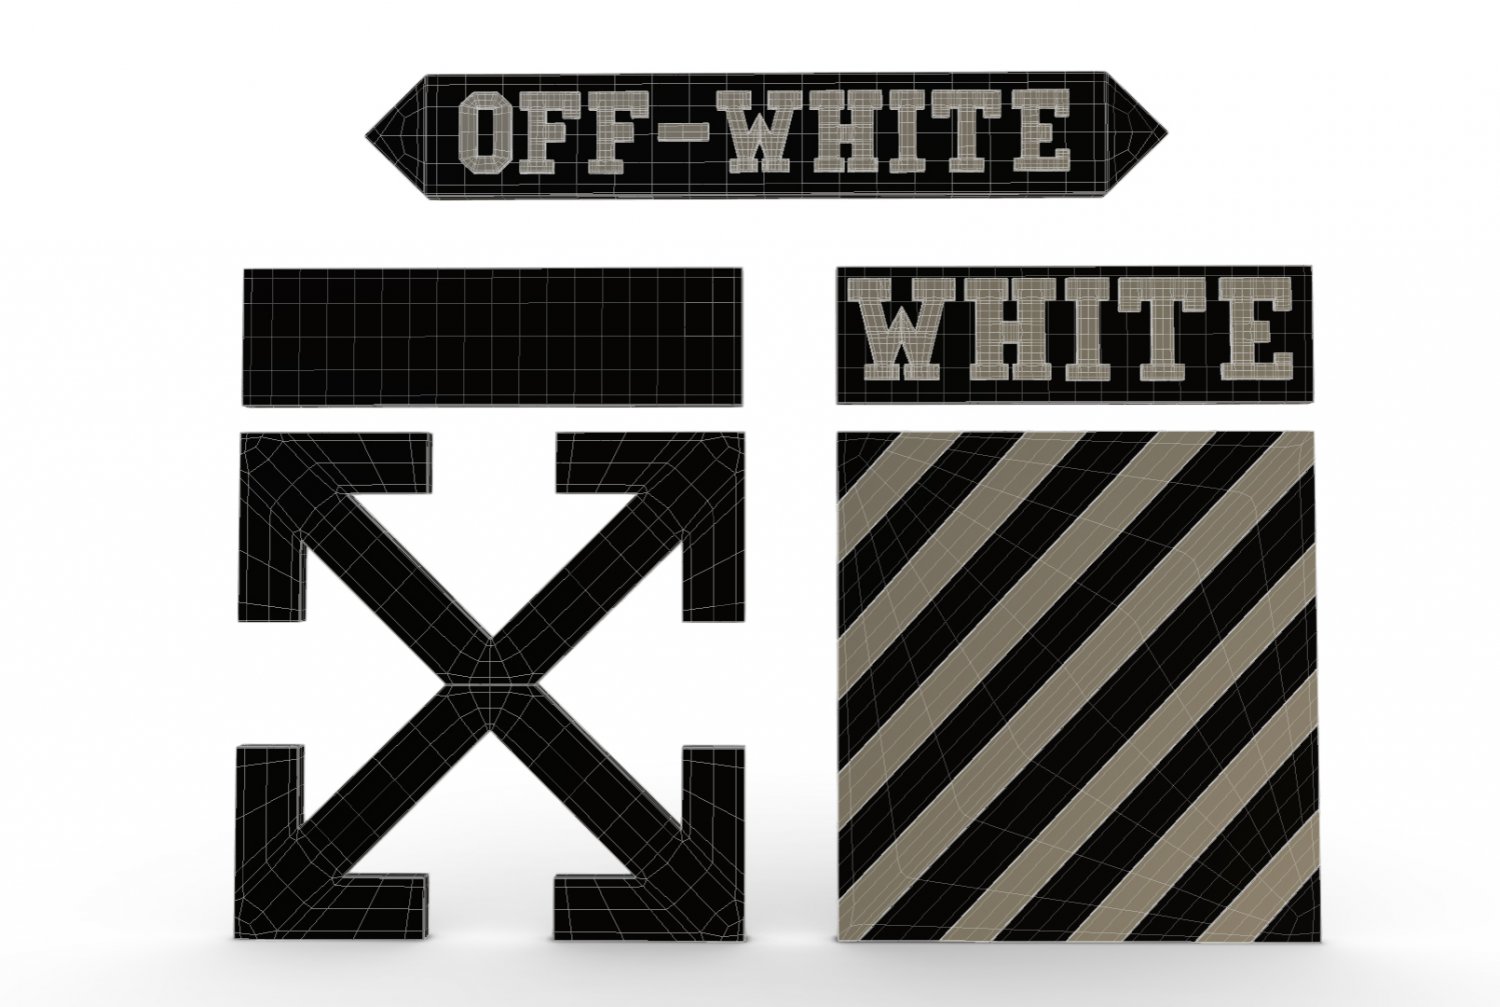 Top 99 off white logo png most viewed and downloaded